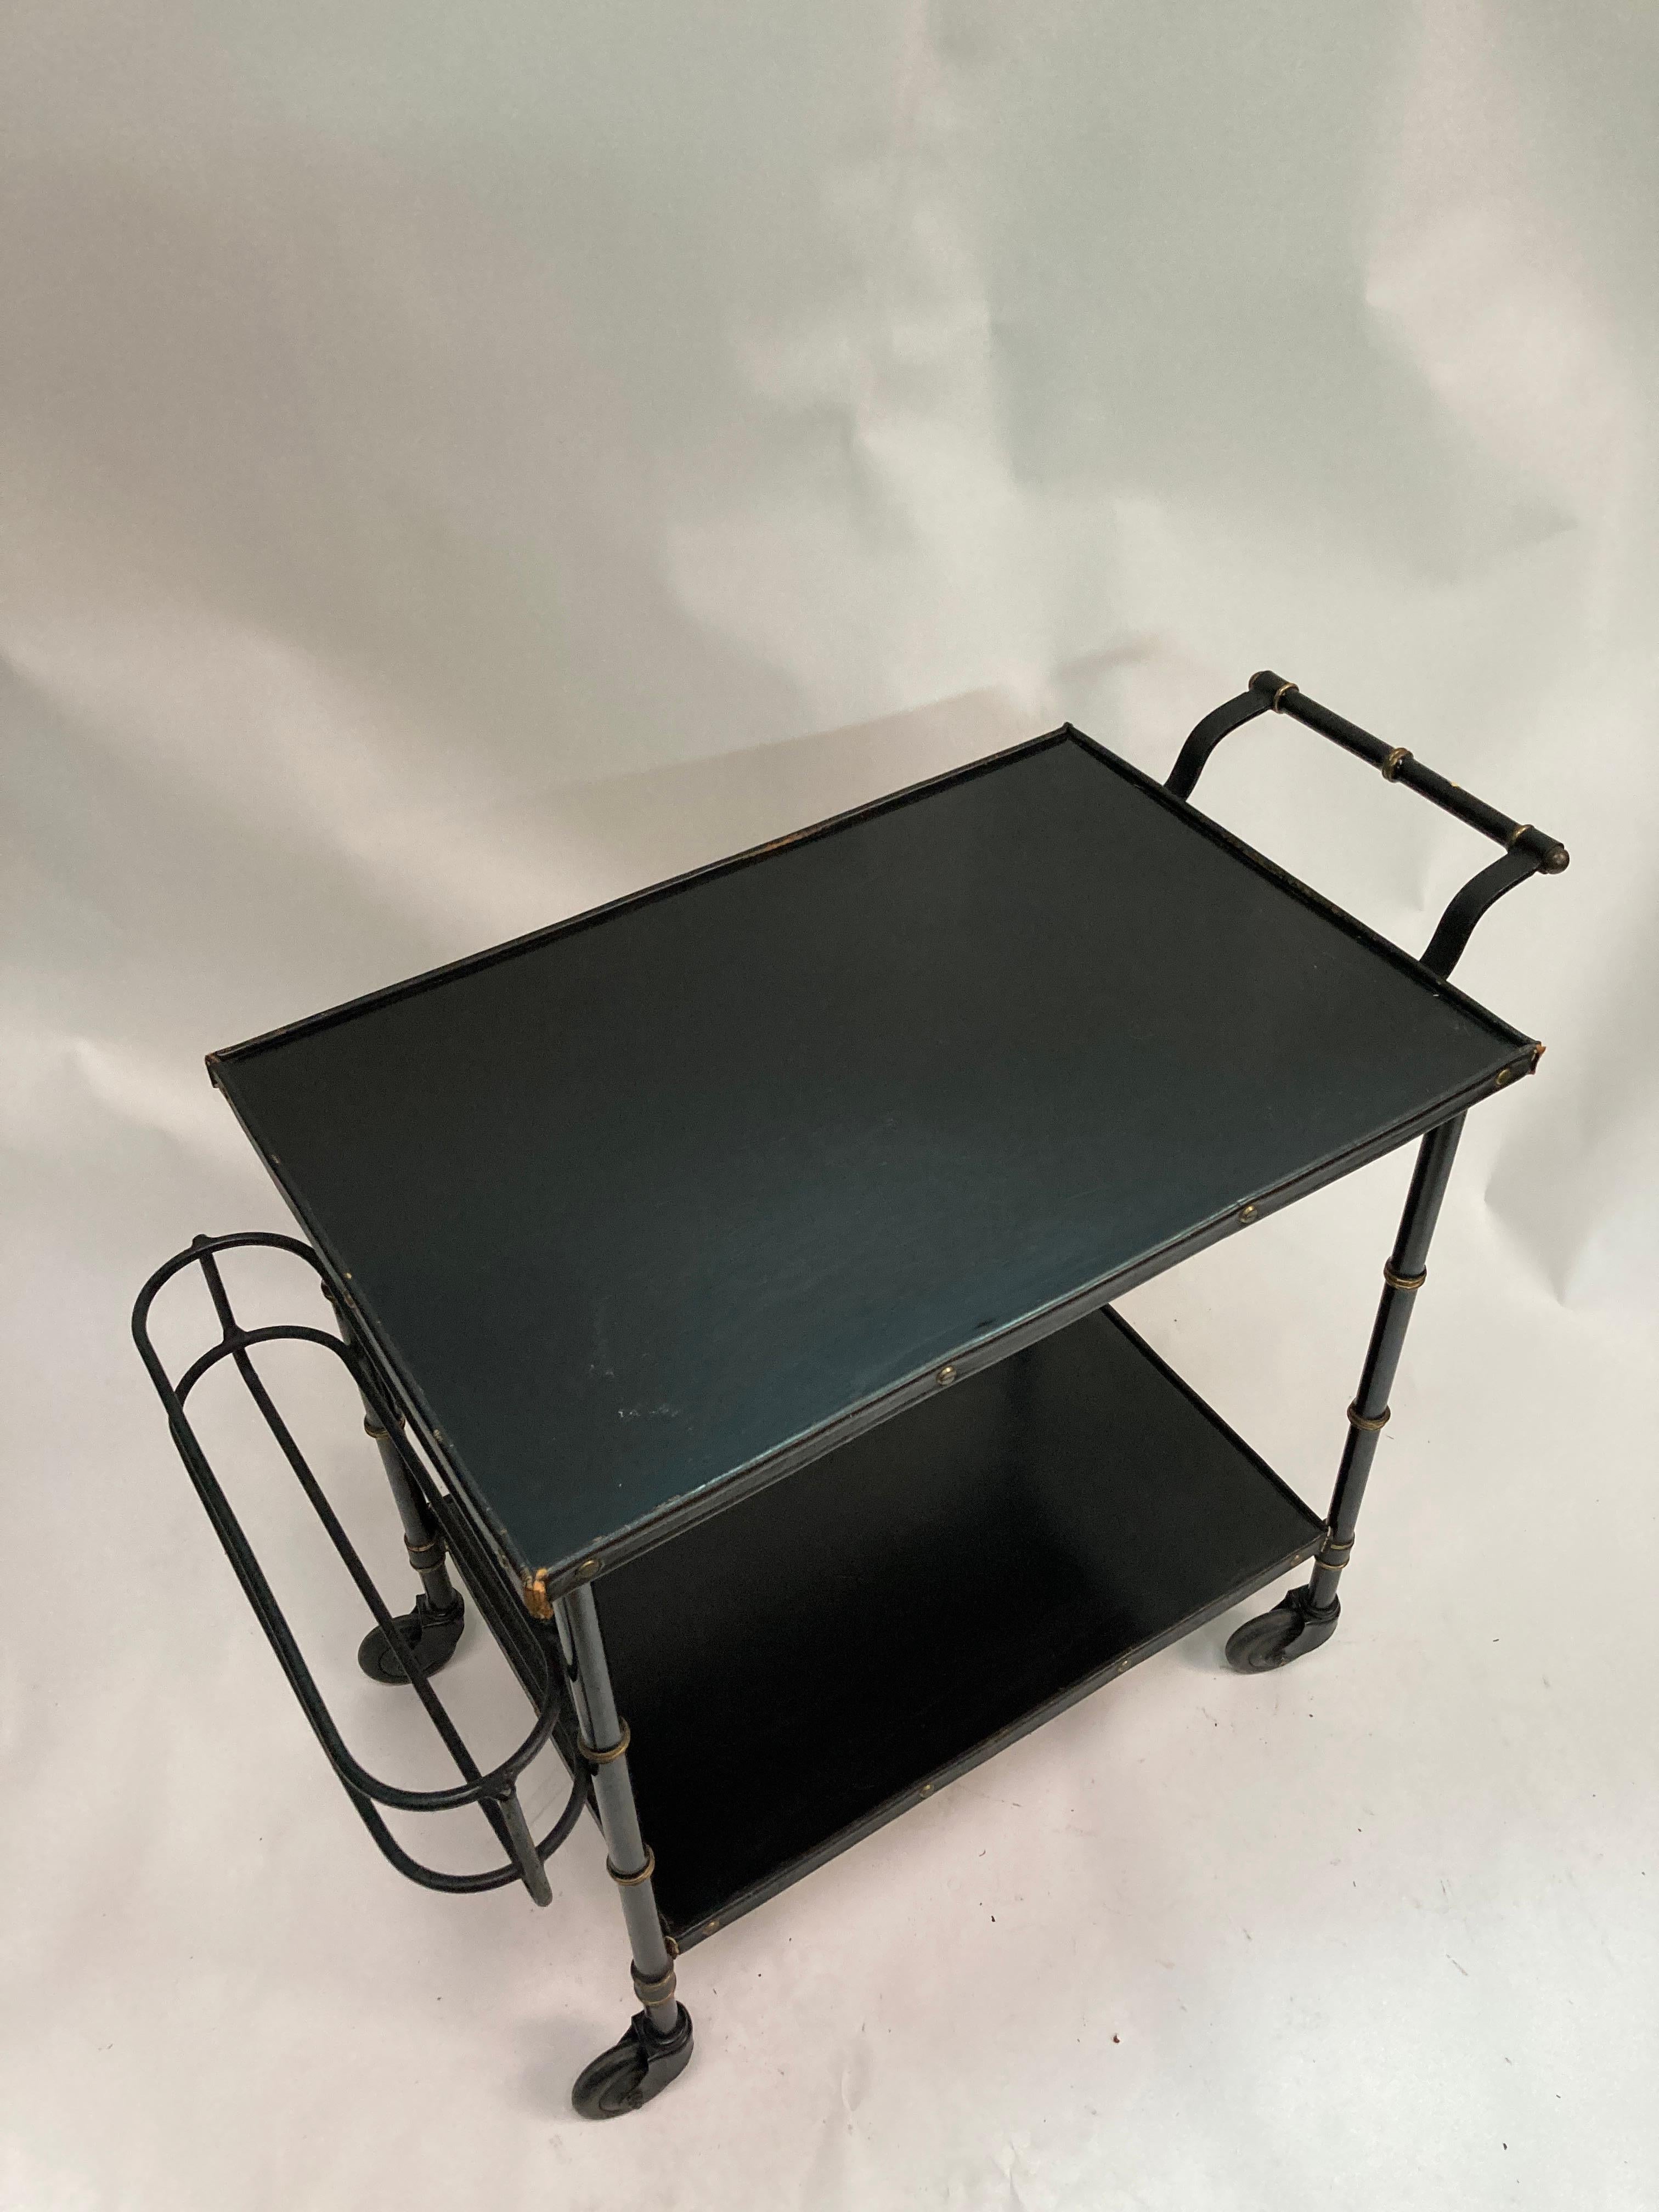 1950's Stitched leather bar cart by Jacques Adnet
with is removable bottle rack
Great condition
